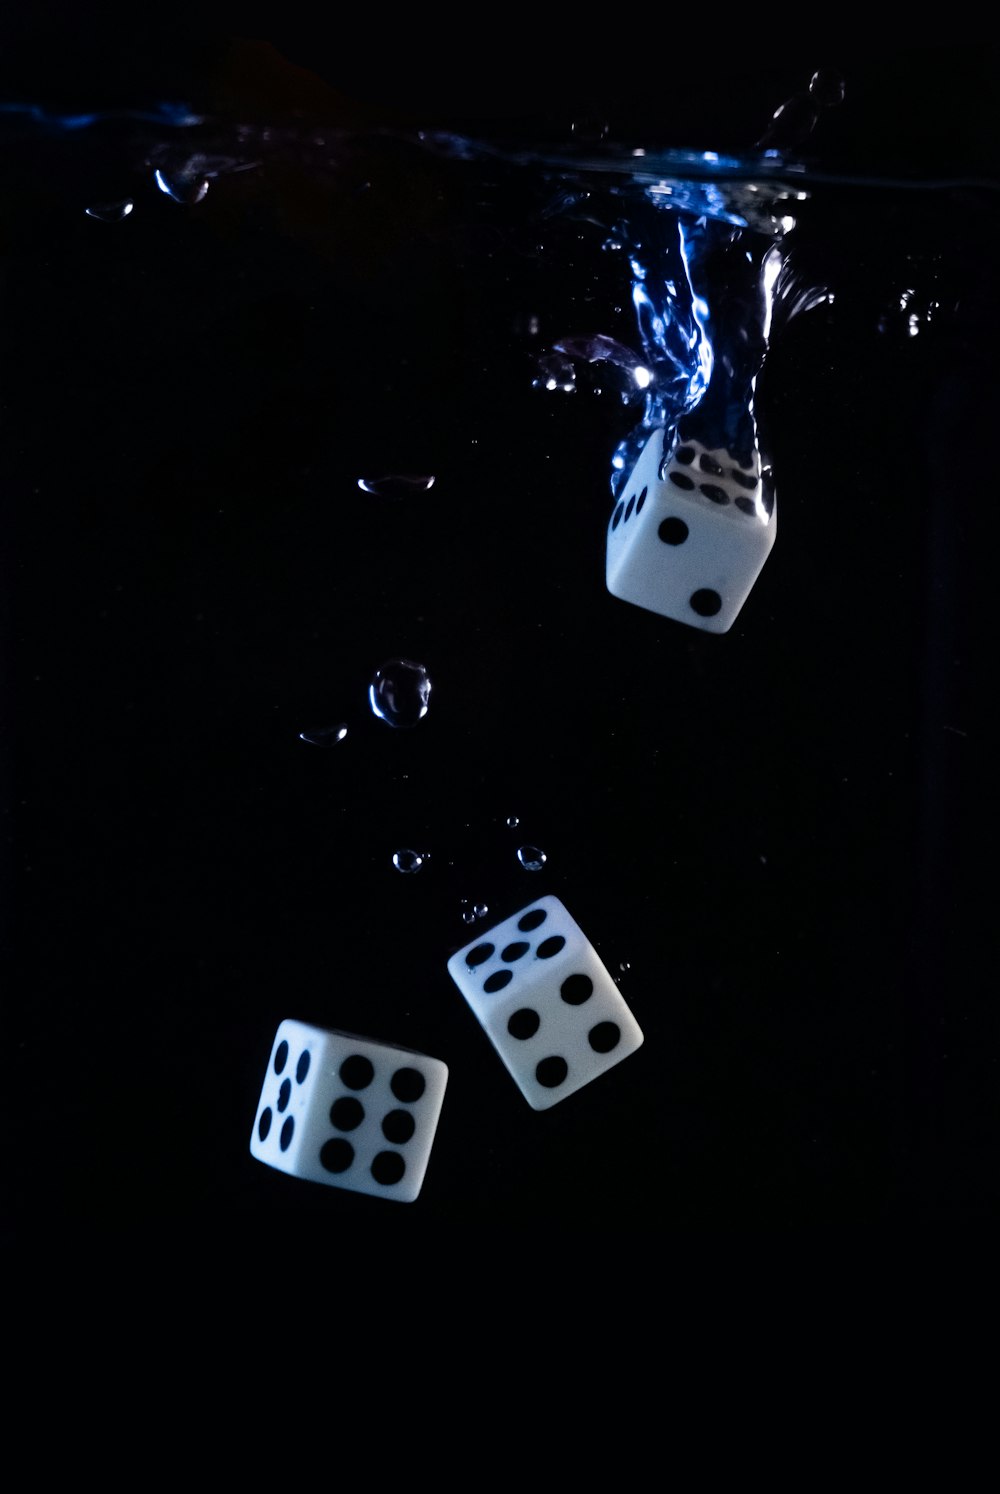 three dices floating in the water on a black background